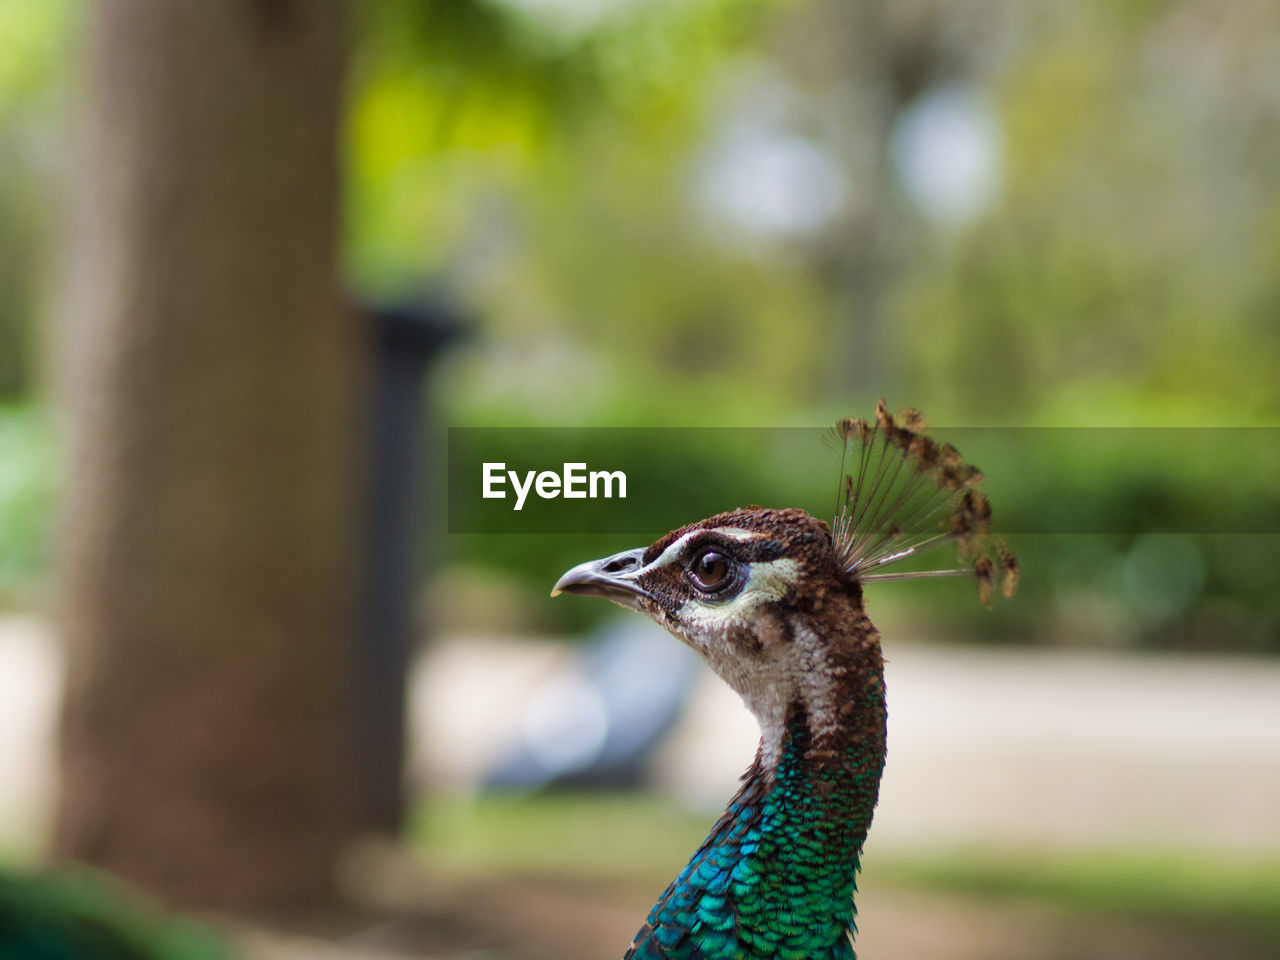 animal themes, animal, one animal, bird, peacock, wildlife, animal wildlife, animal body part, nature, green, focus on foreground, animal head, close-up, no people, peacock feather, beauty in nature, outdoors, portrait, day, beak, plant, feather, tree